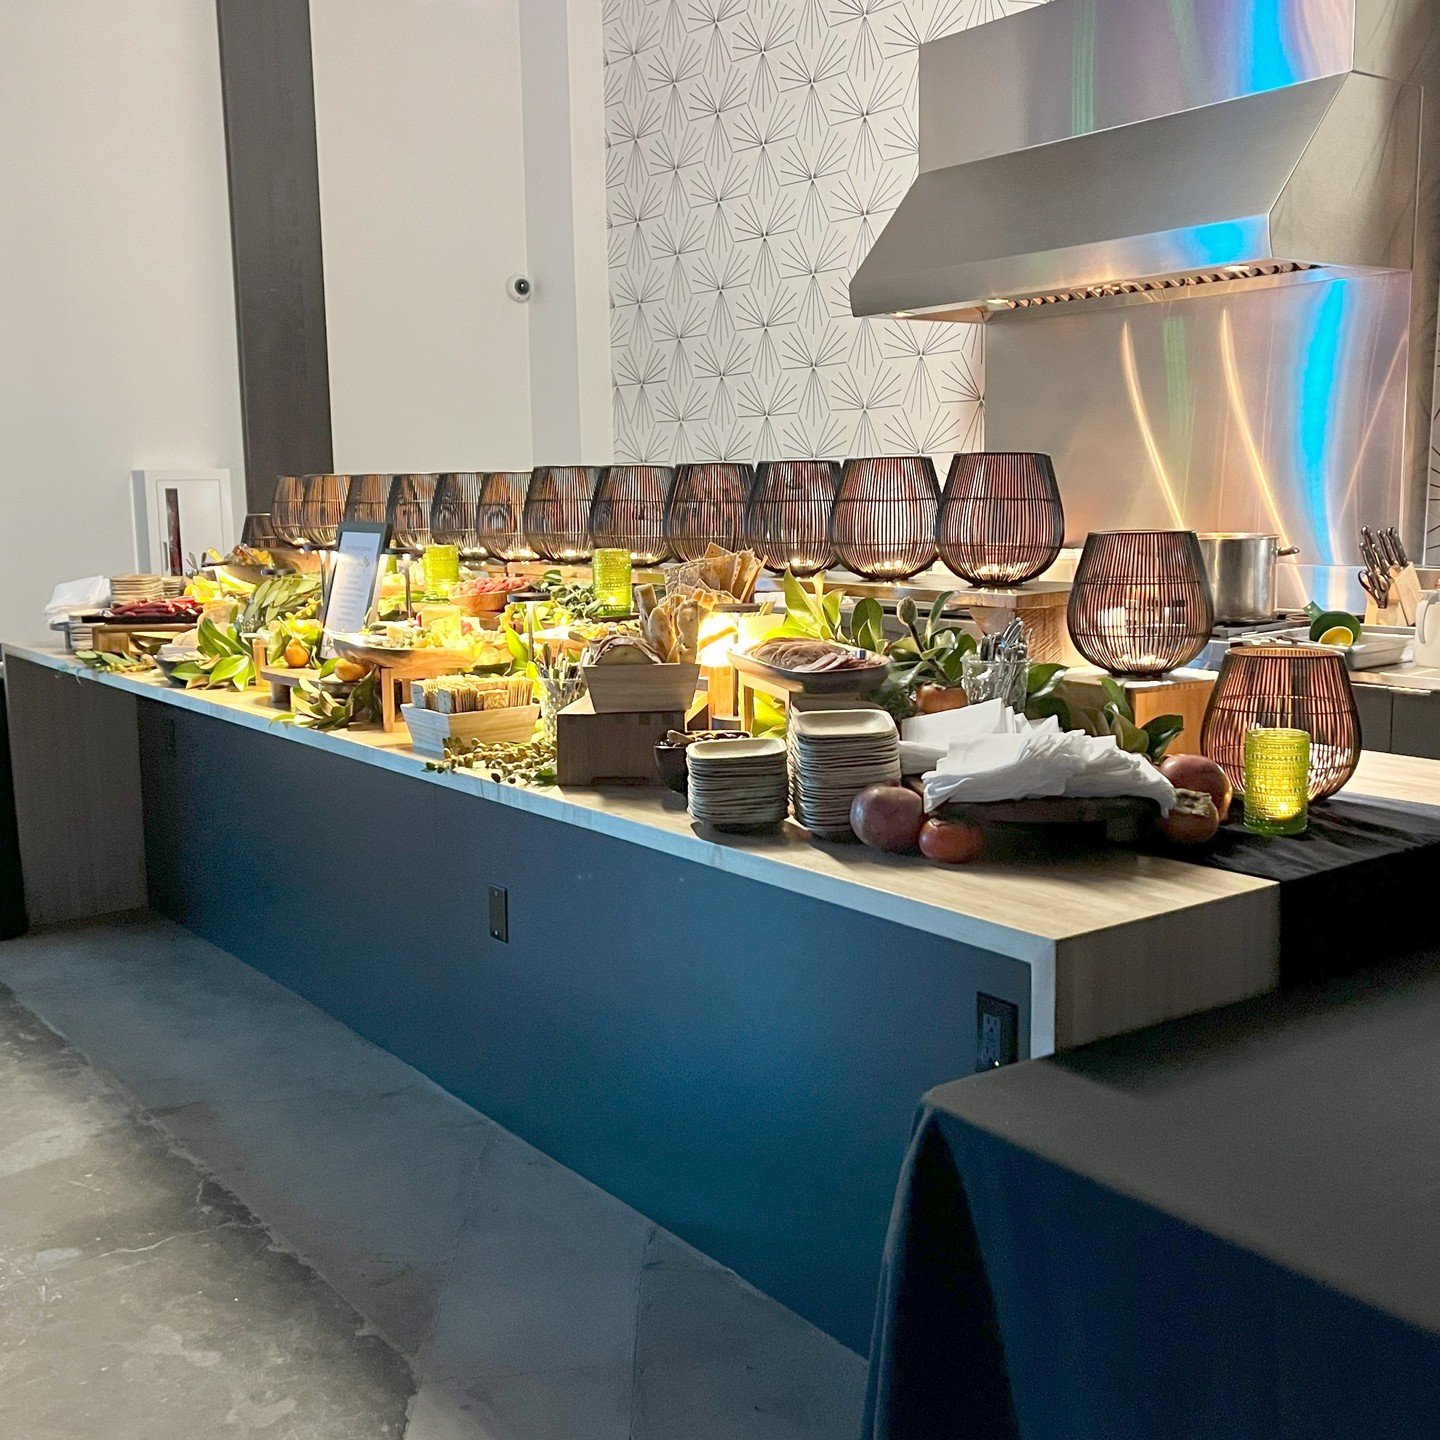 At Stone Way Auto impress your guests with a delicious buffet or artfully arranged charcuterie board, served on a sleek custom wide butcher block counter with ample space for guests to move around comfortably. Lighting in the modern kitchen space is 